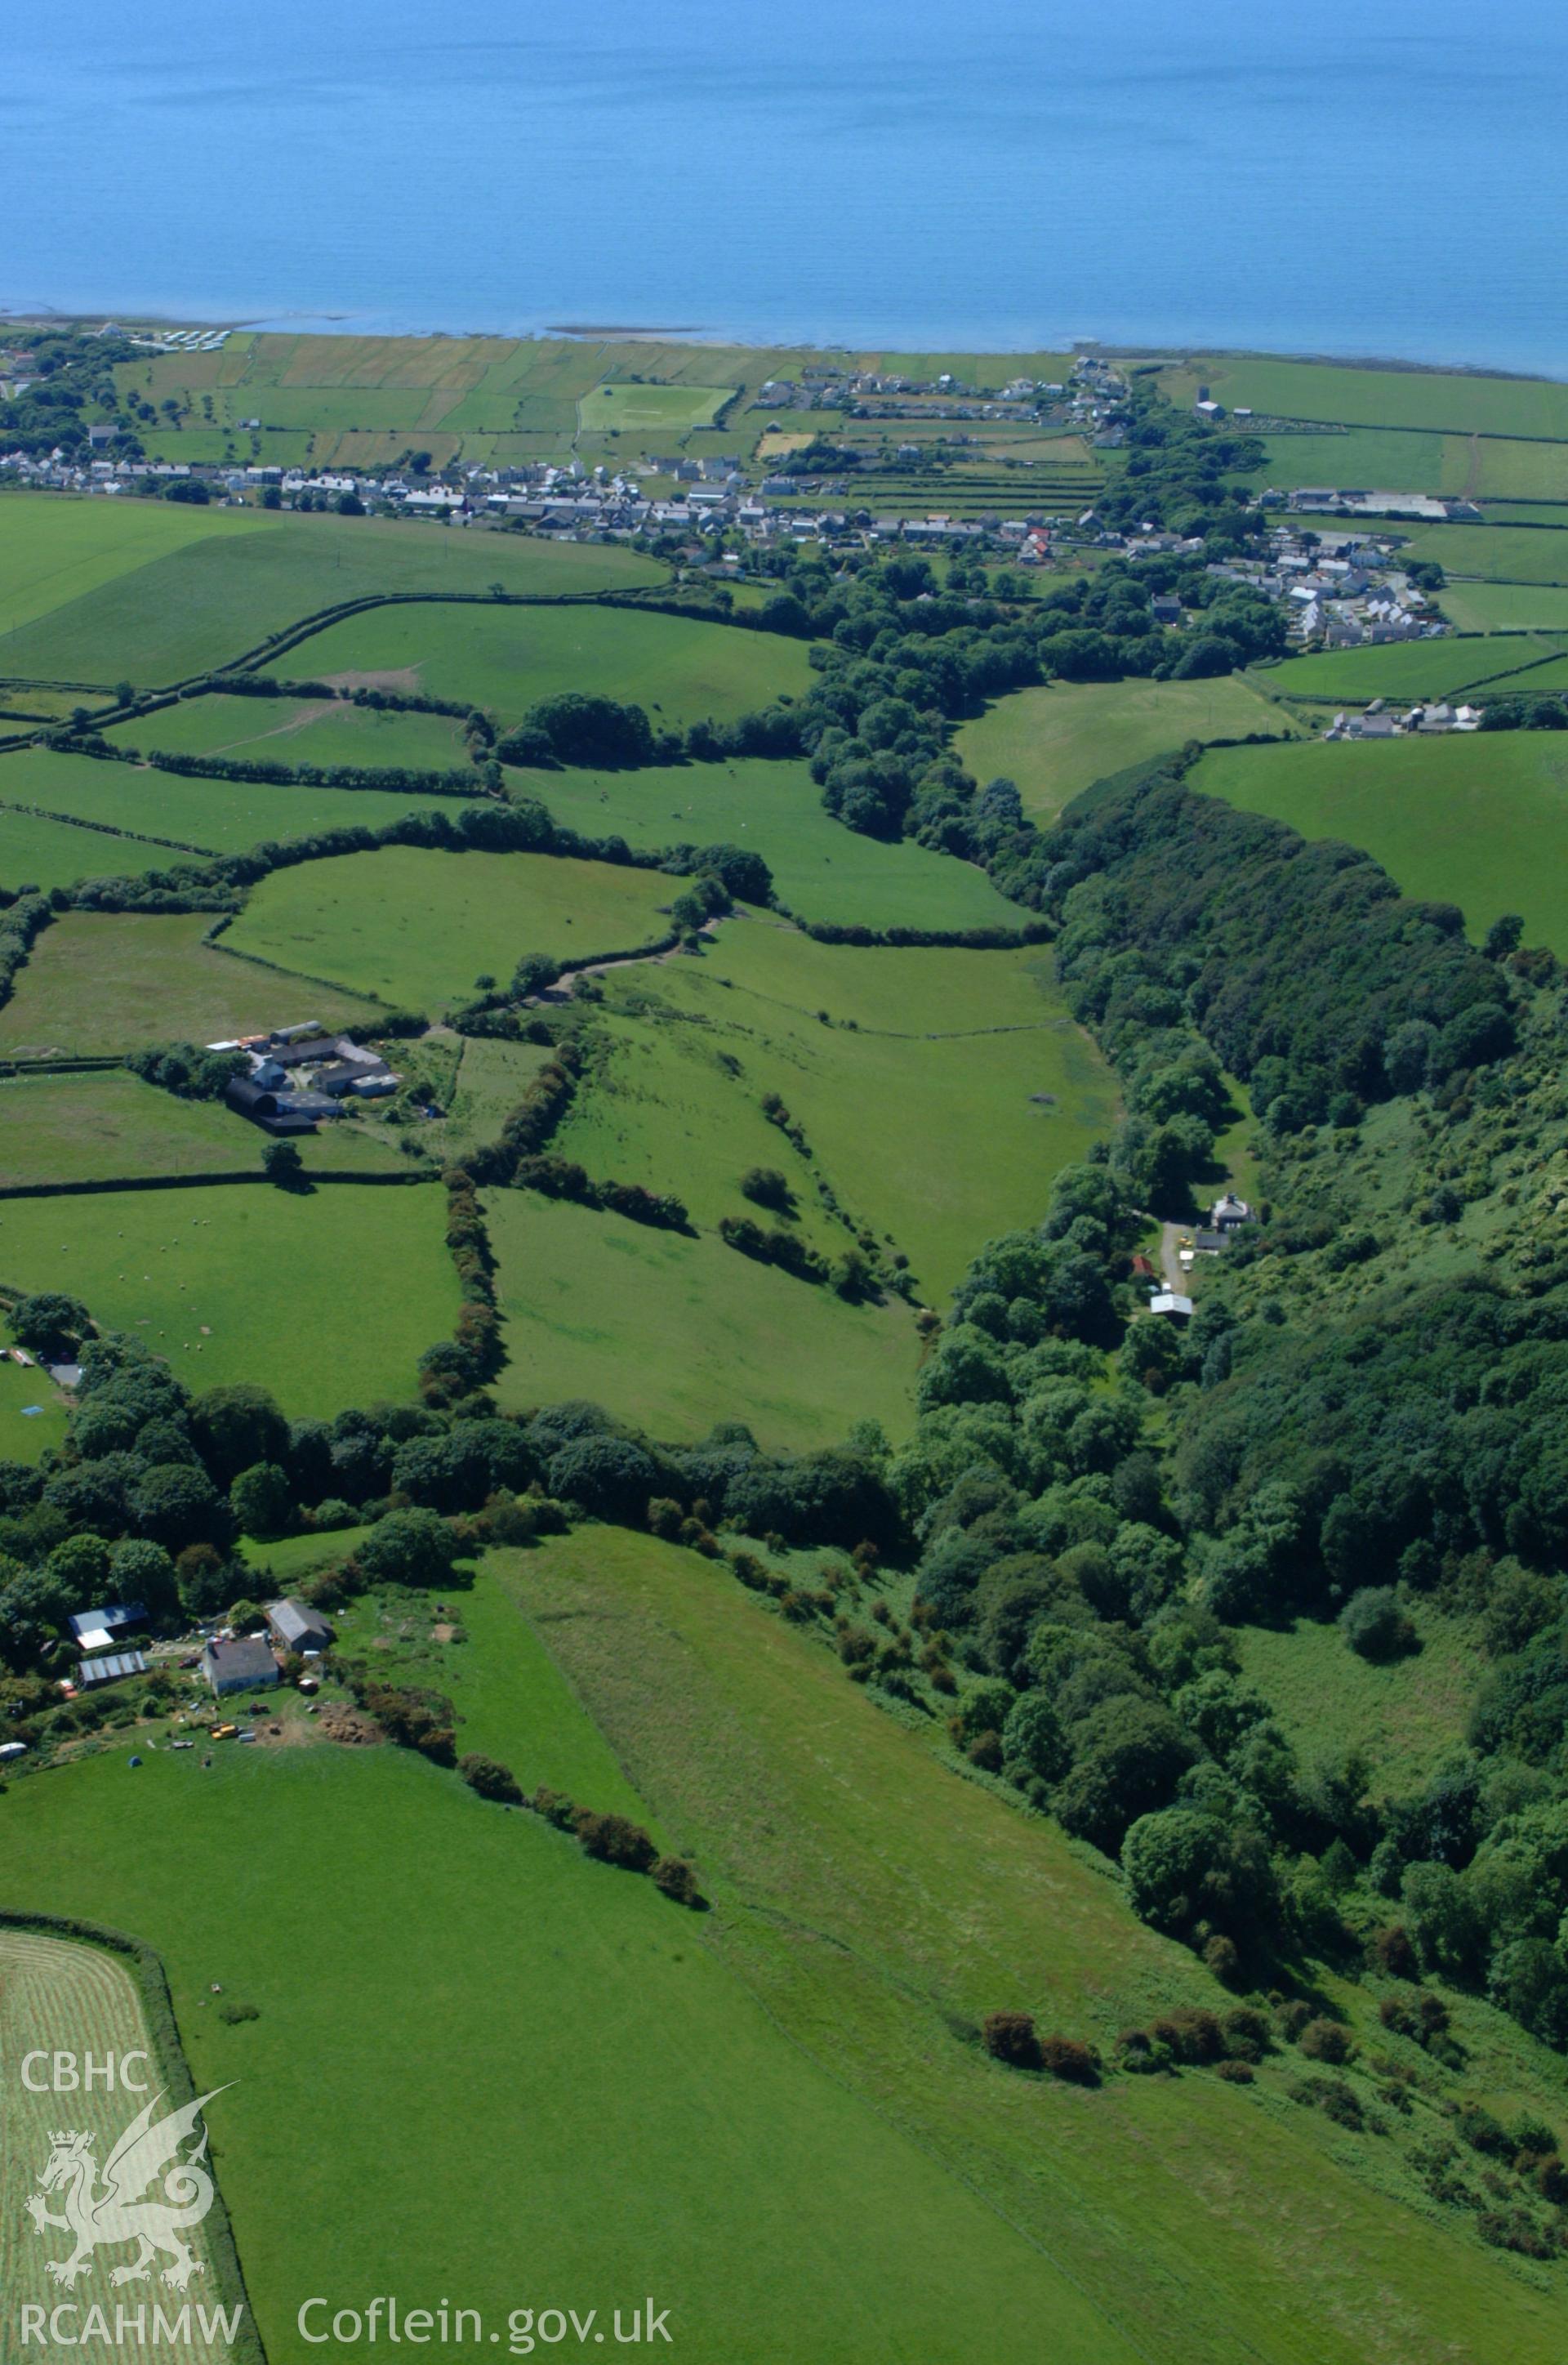 RCAHMW colour oblique aerial photograph of Llanon taken on 14/06/2004 by Toby Driver